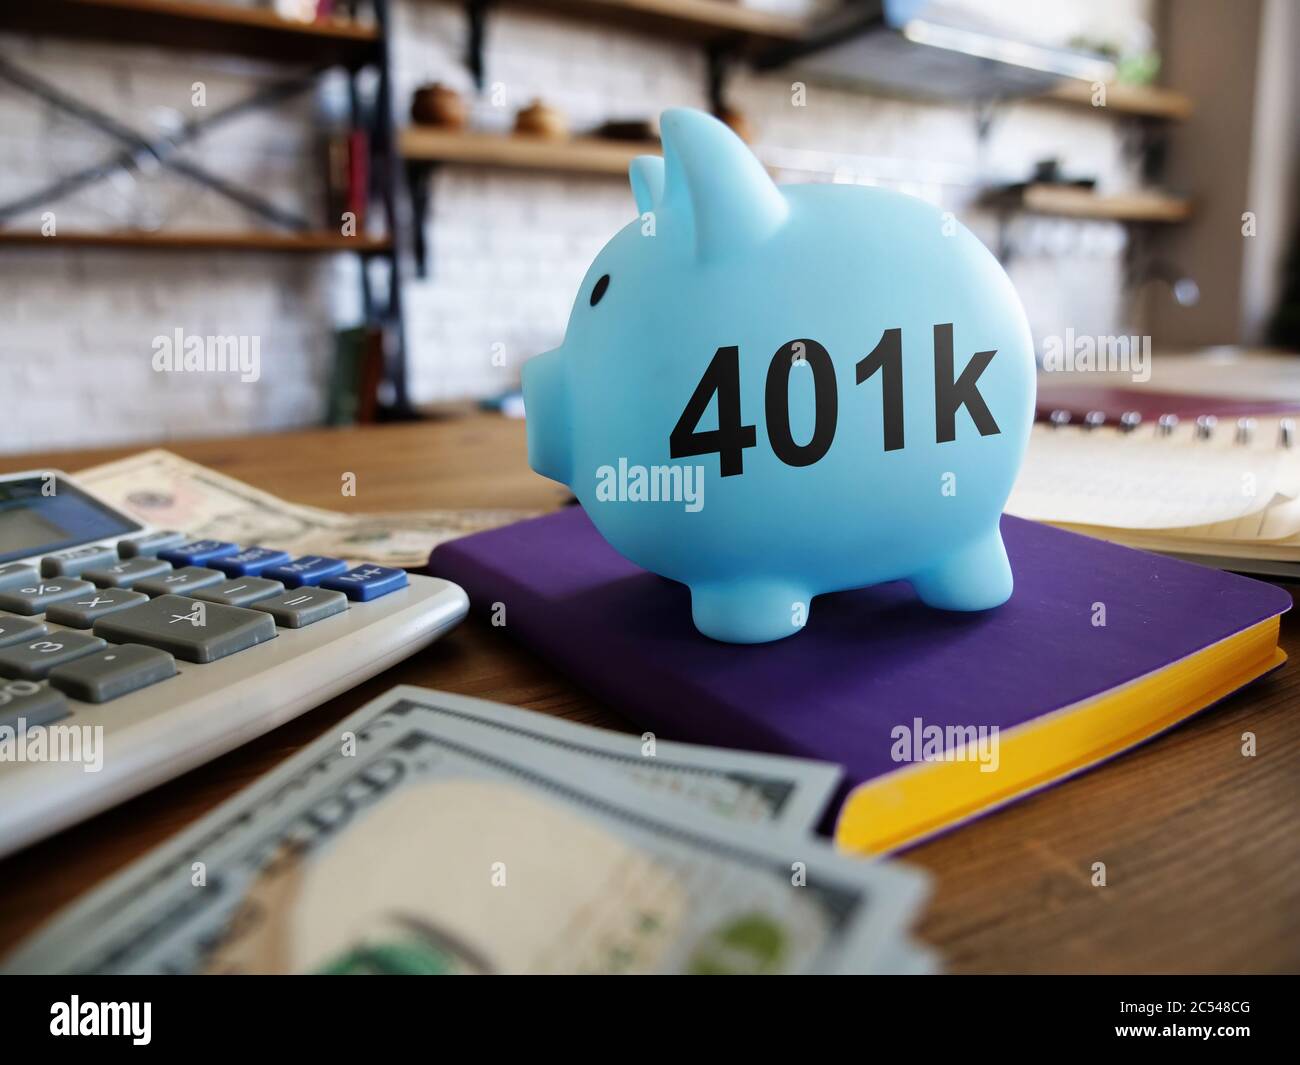 401k pension plan concept. Piggy bank and money at the kitchen. Stock Photo